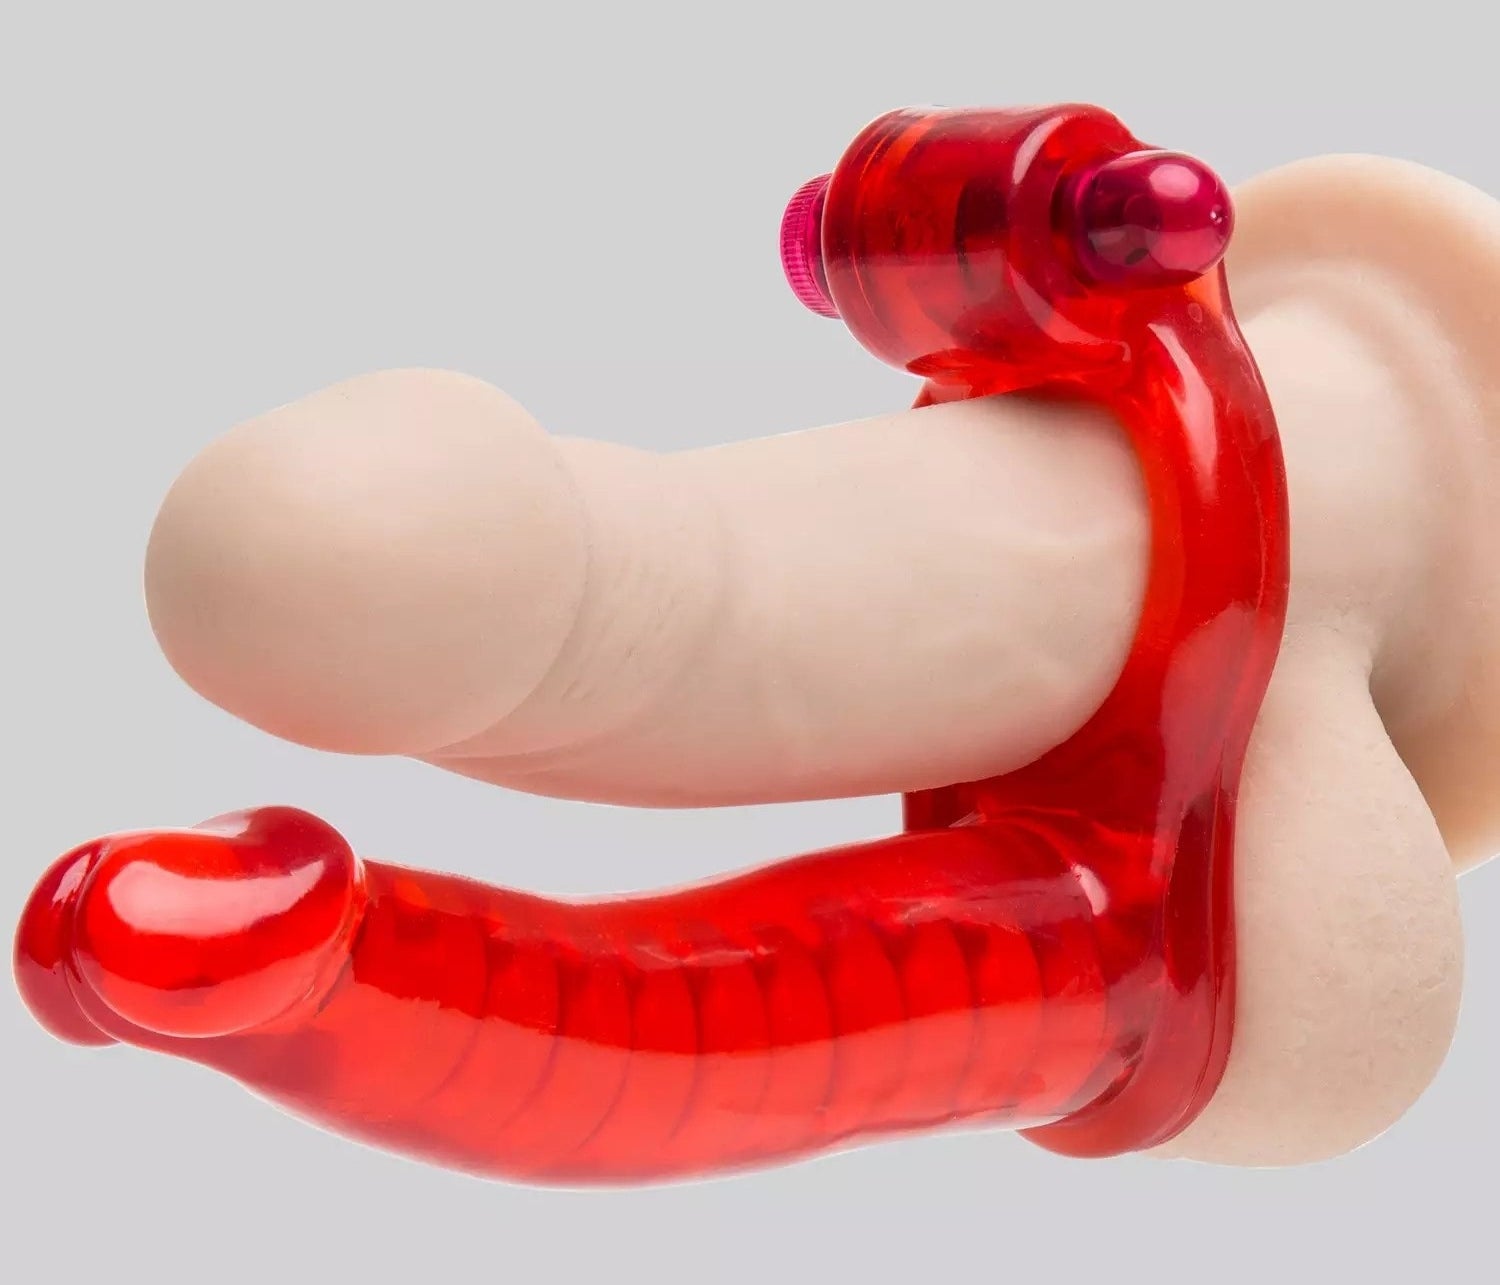 Red double penetration cock ring demonstrated on realistic dildo